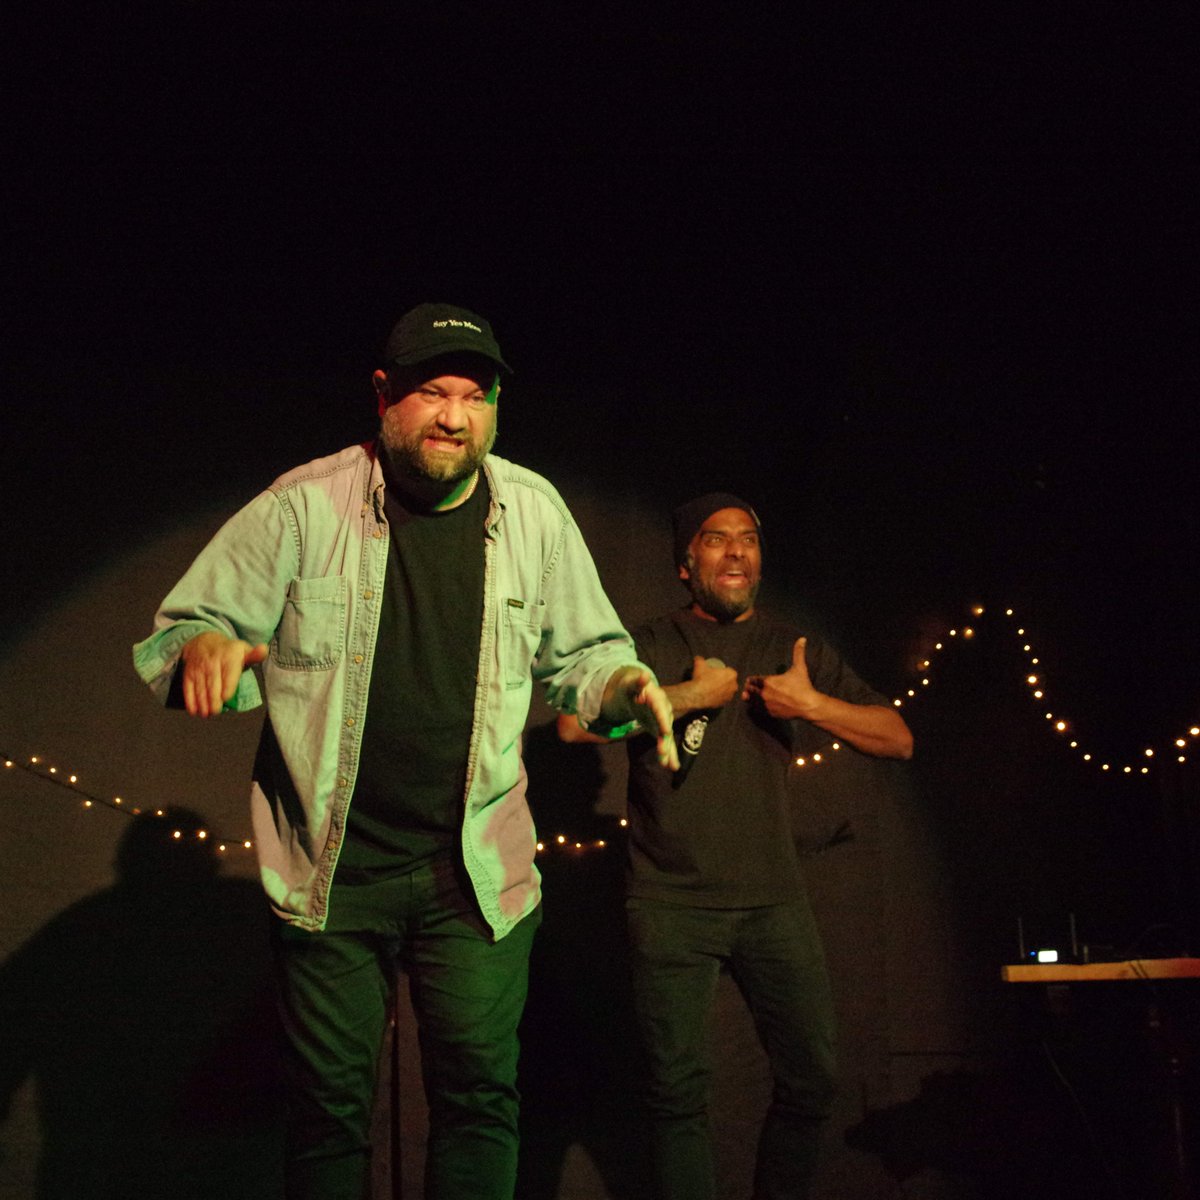 At this month's Scoops we had improvised hip hop about Gregorians messing with the calendar from @track96improv! Join us again on March 5th when we'll be a THE HARE AND HOUNDS with more great acts! Tickets: tinyurl.com/scoops2024 #improv #improvcomedy #comedyshow #brightoncomedy